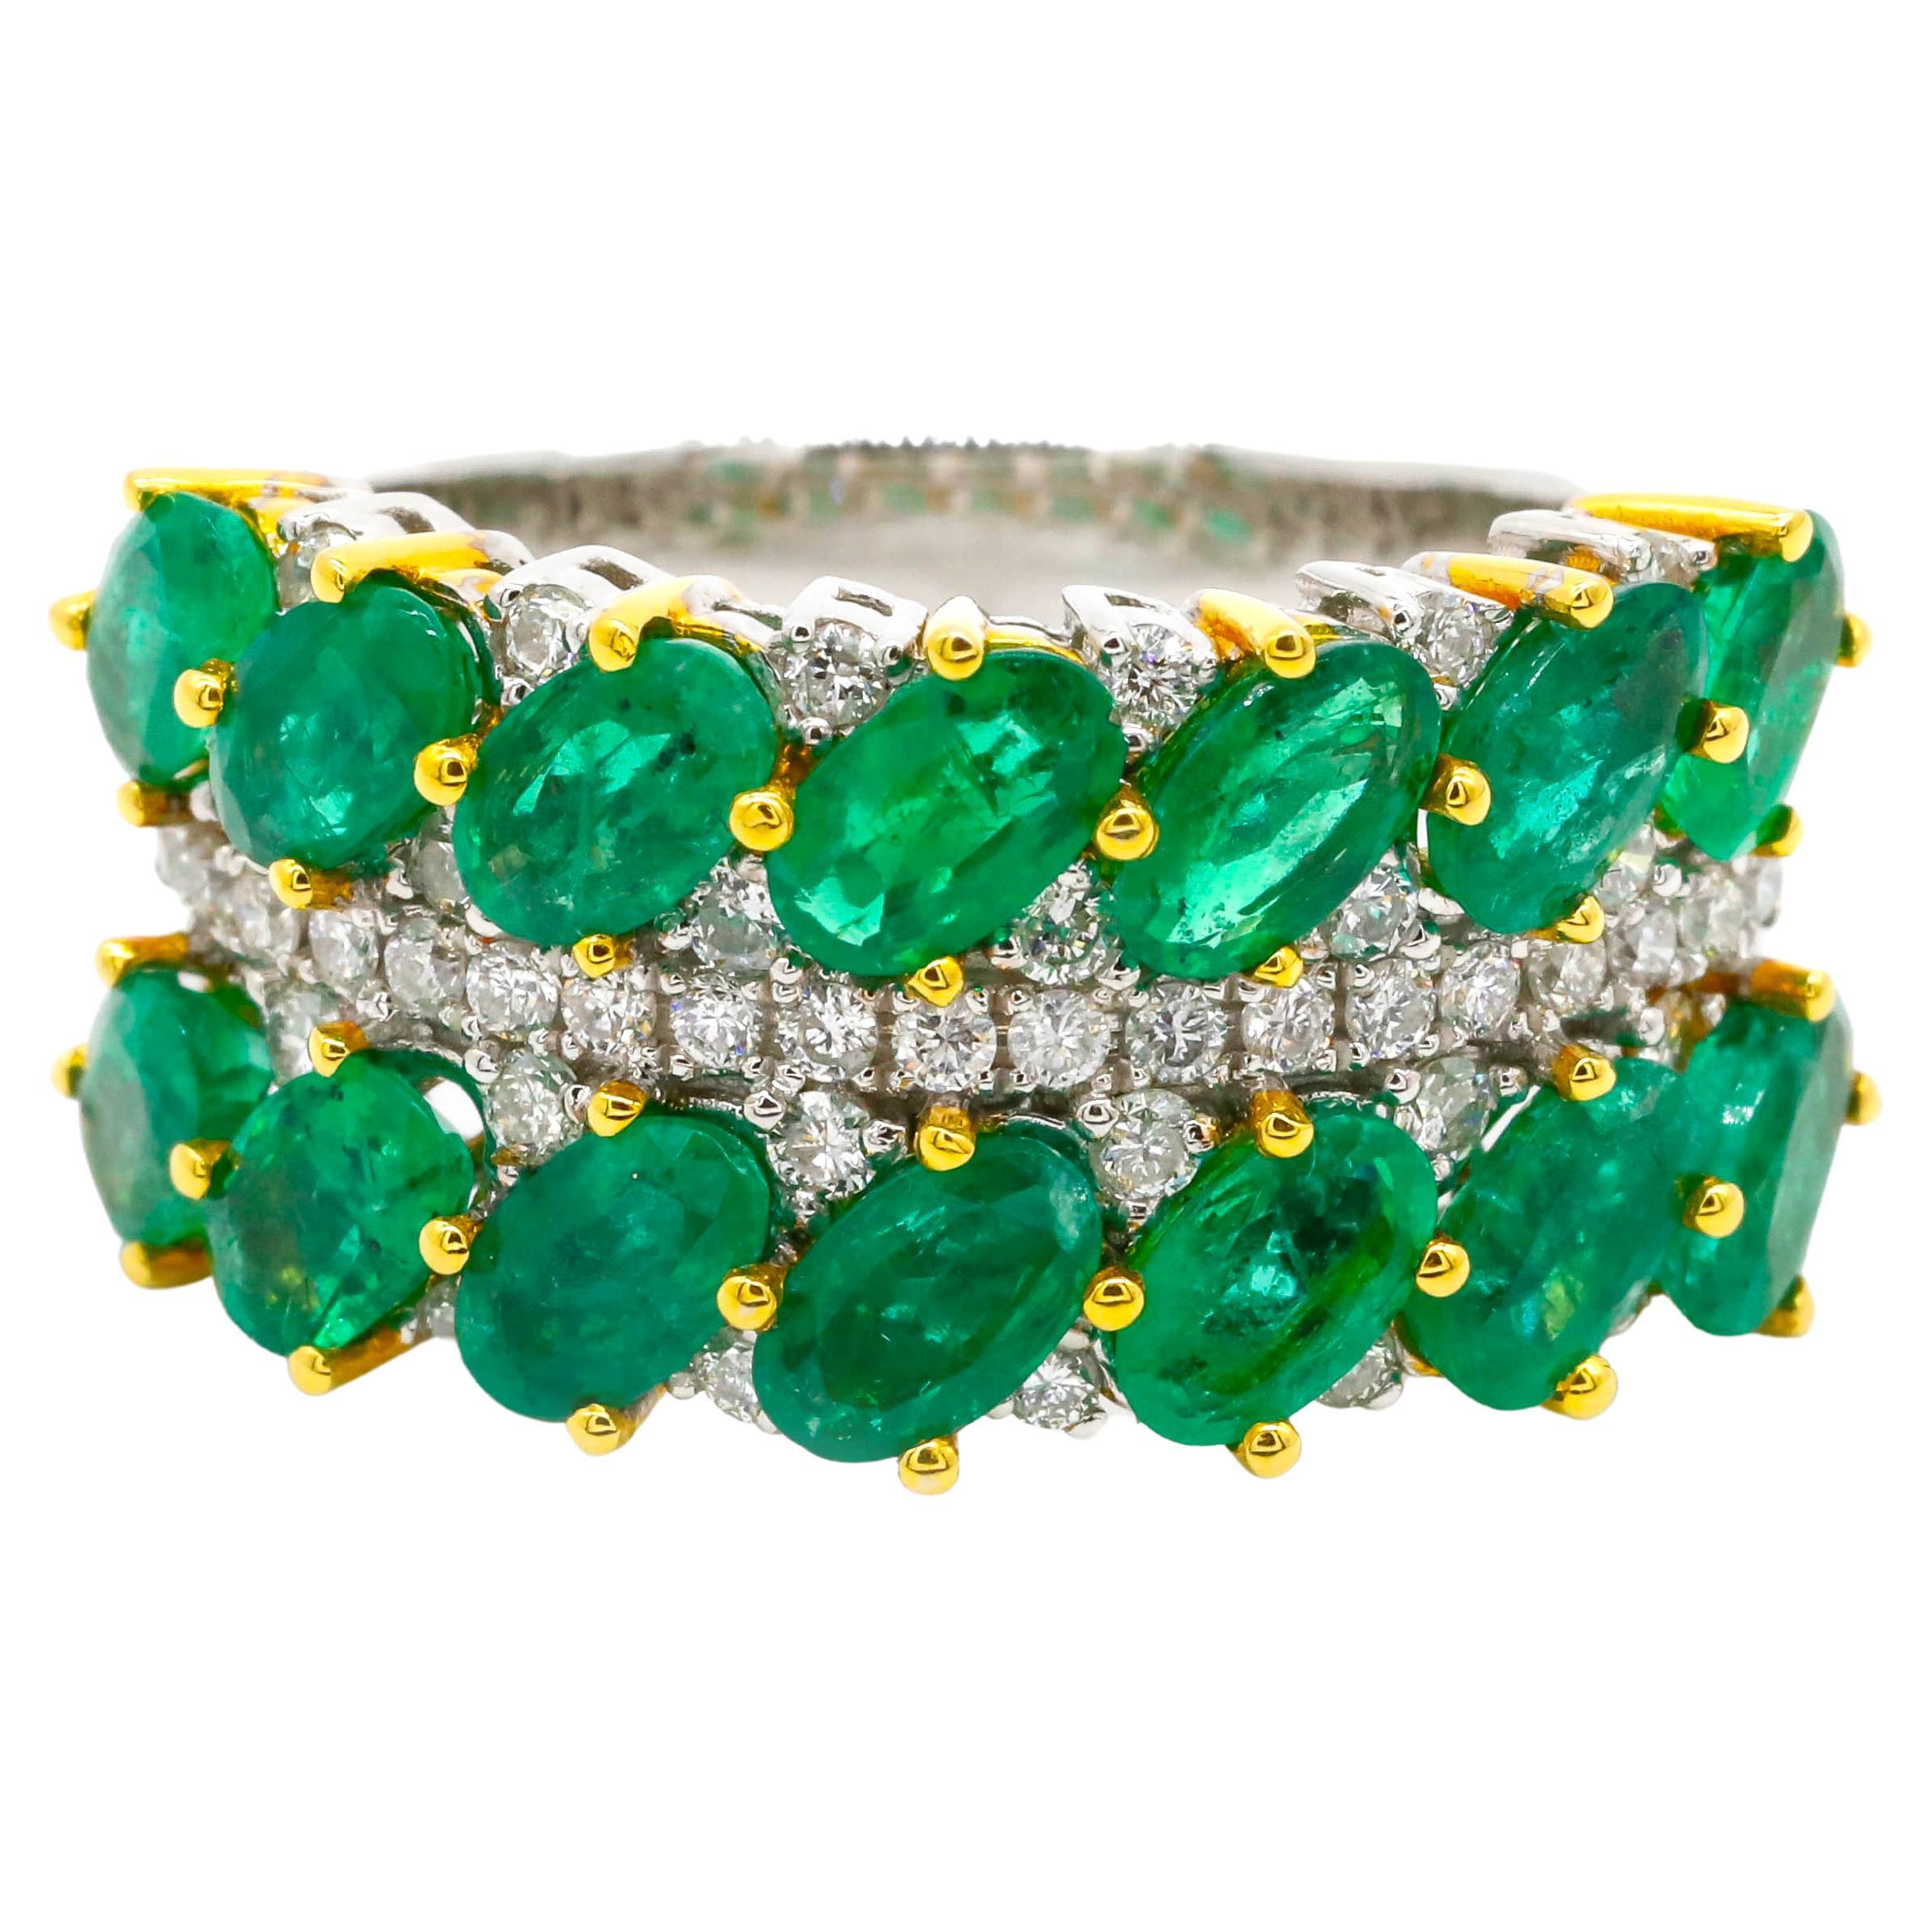 3.20 Carat Oval Cut Emerald and Round Diamond Band Ring in 18k Two-Tone Gold